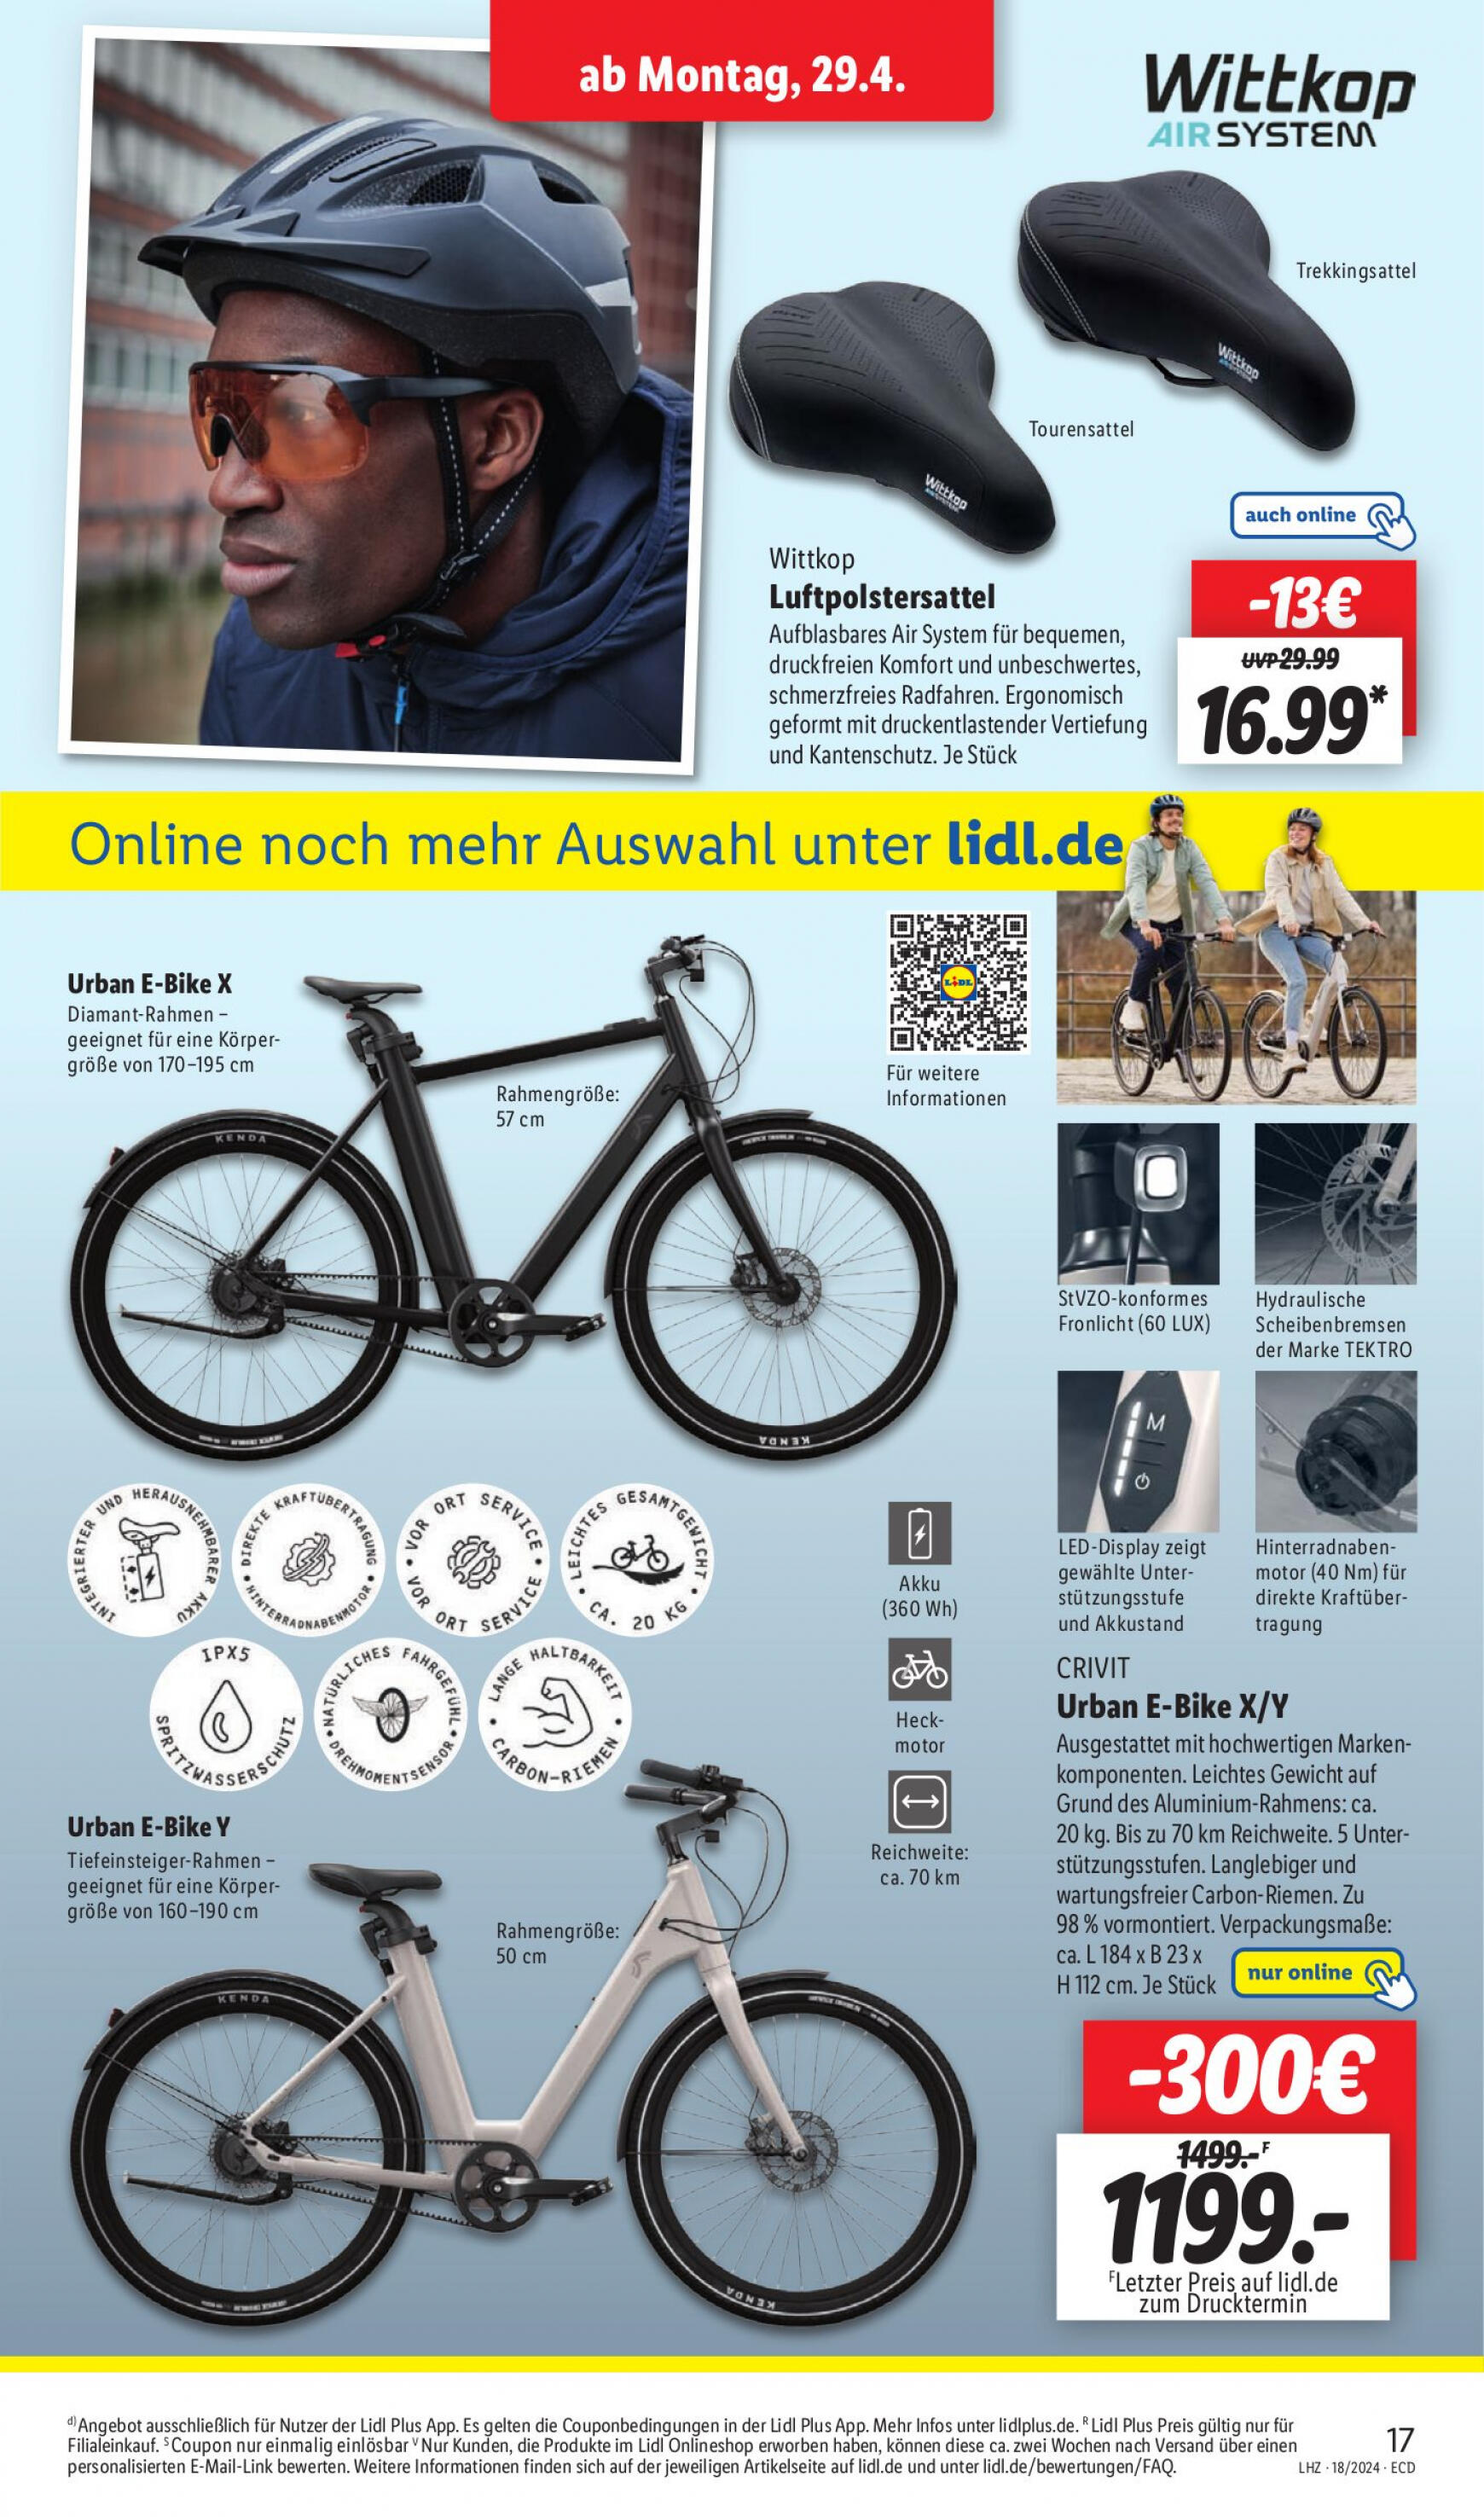 lidl - Flyer Lidl aktuell 29.04. - 04.05. - page: 21